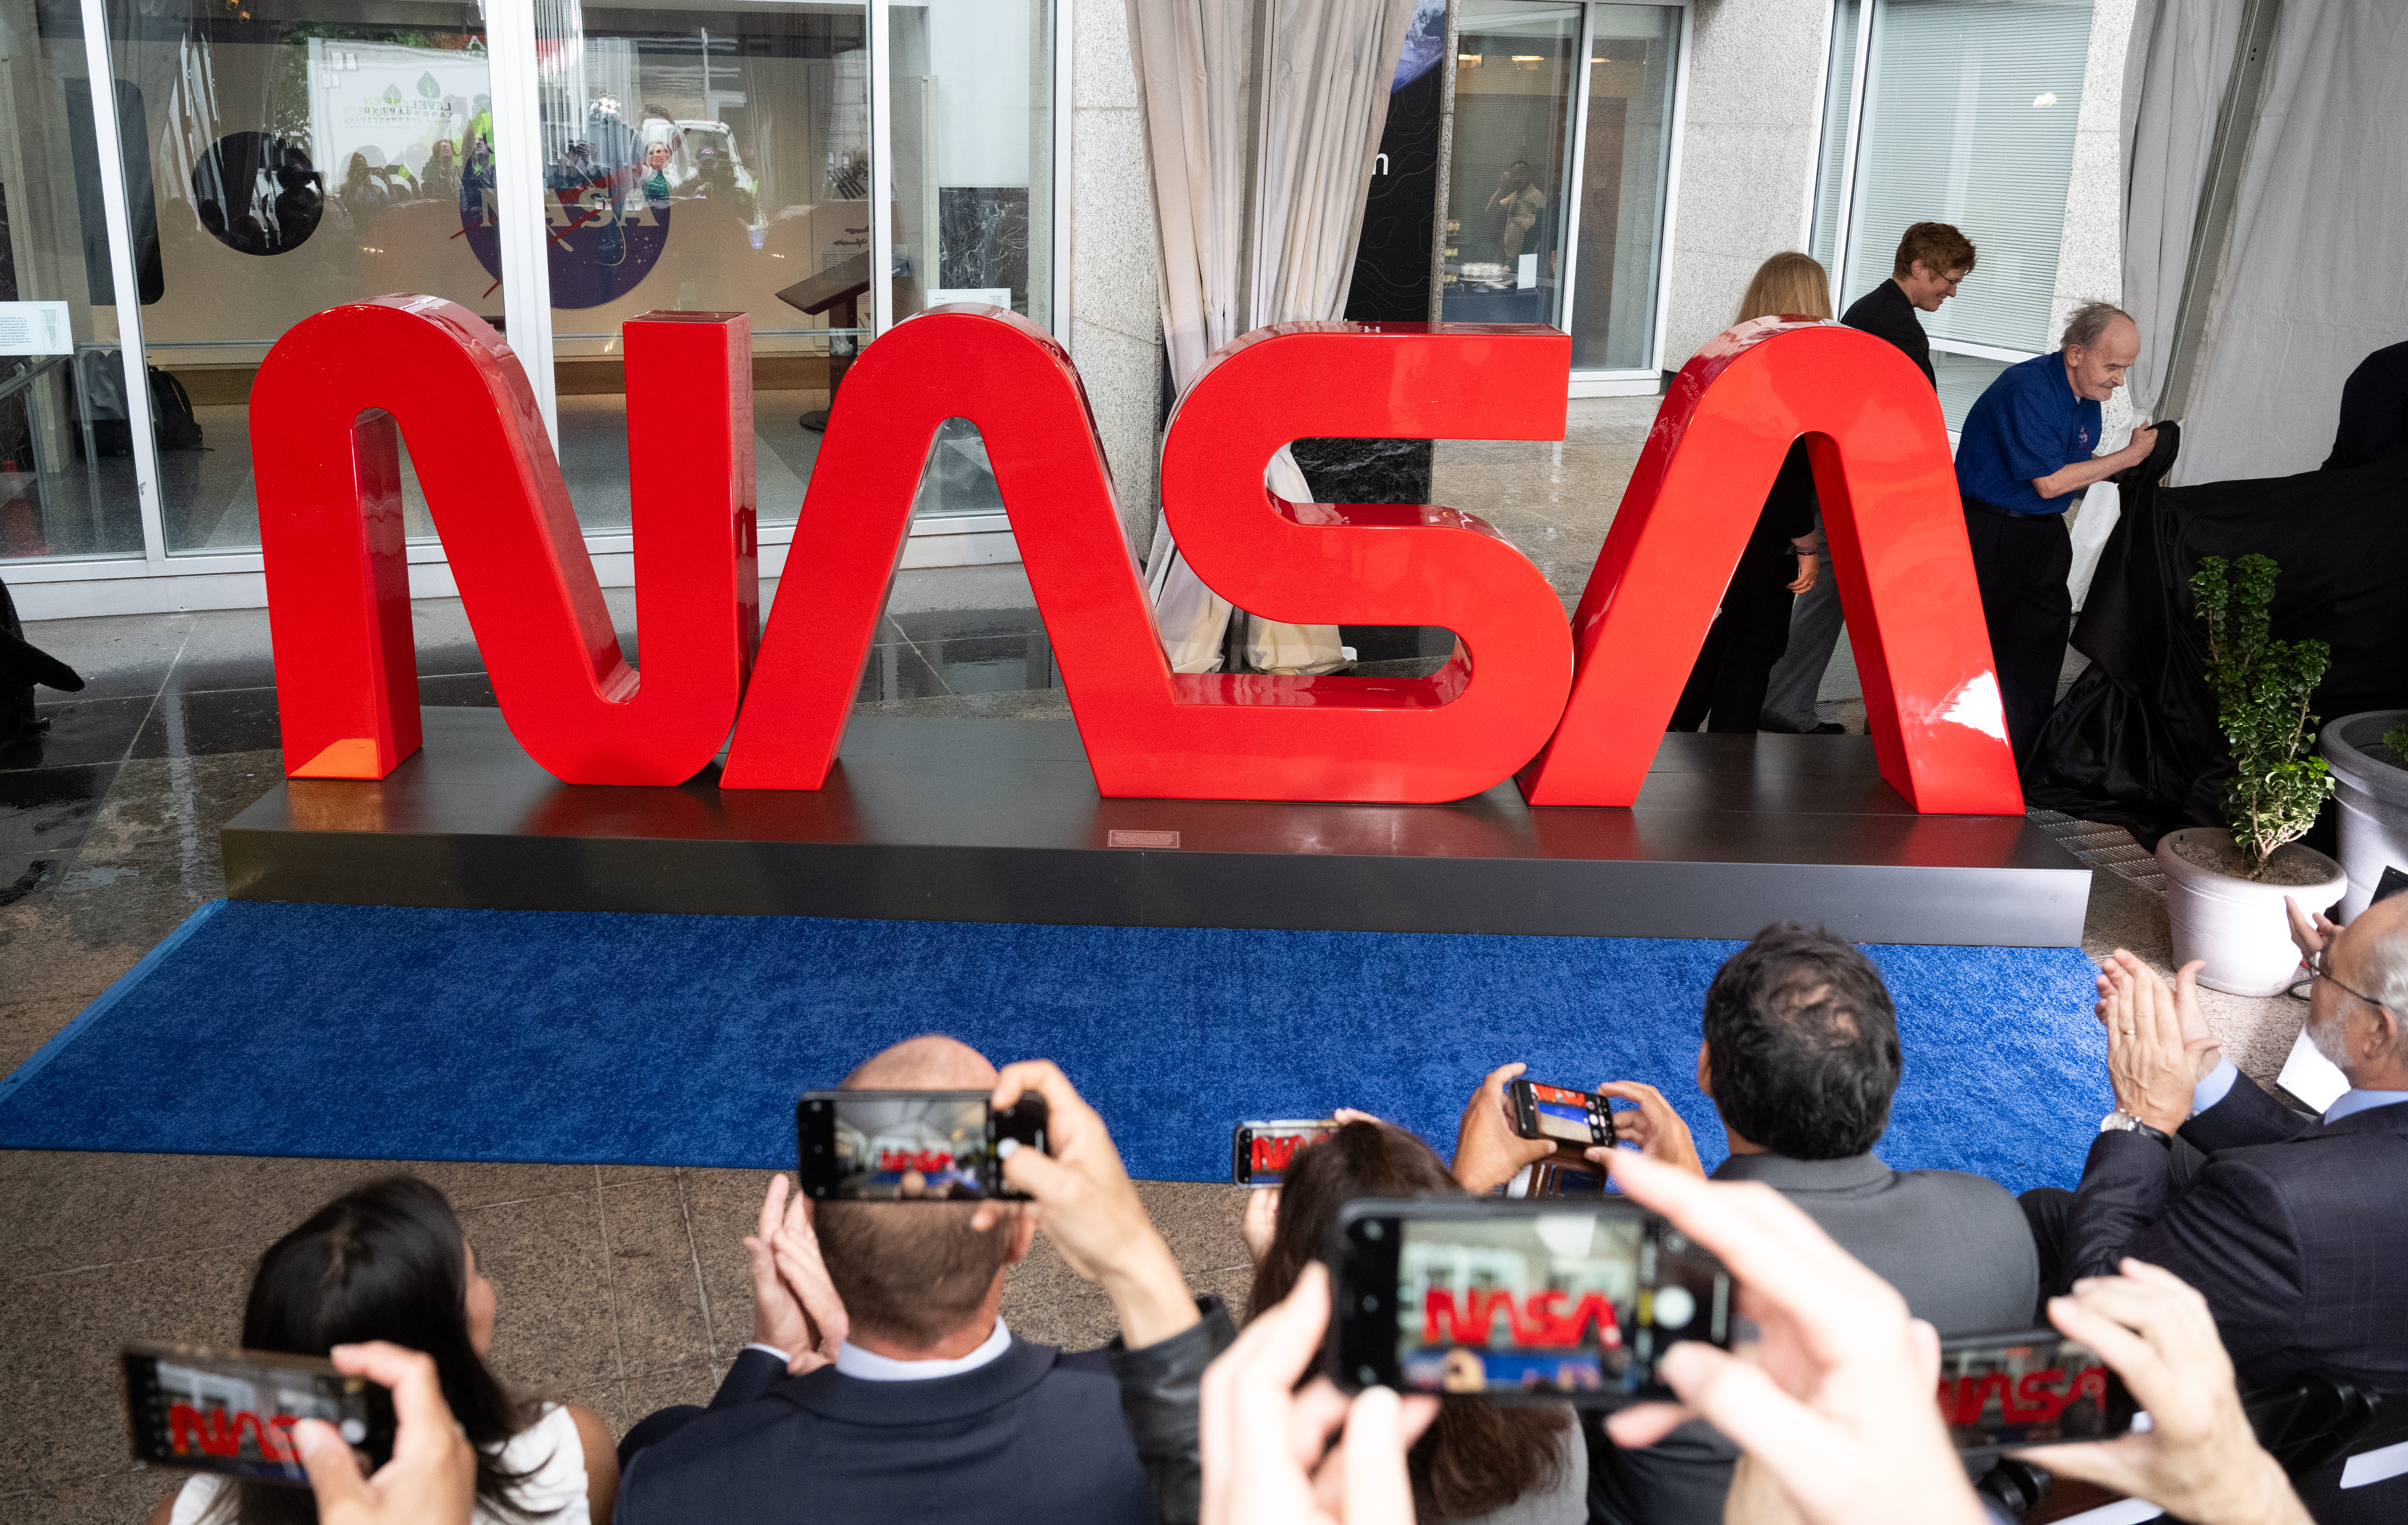 A red sign reading "NASA" in the "worm" logotype created in the 1970s stands before a crowd of people clapping and taking pictures. The red three-dimensional letters rest on a black platform, which is on a blue carpet in front of the Earth Information Center at NASA Headquarters in Washington.